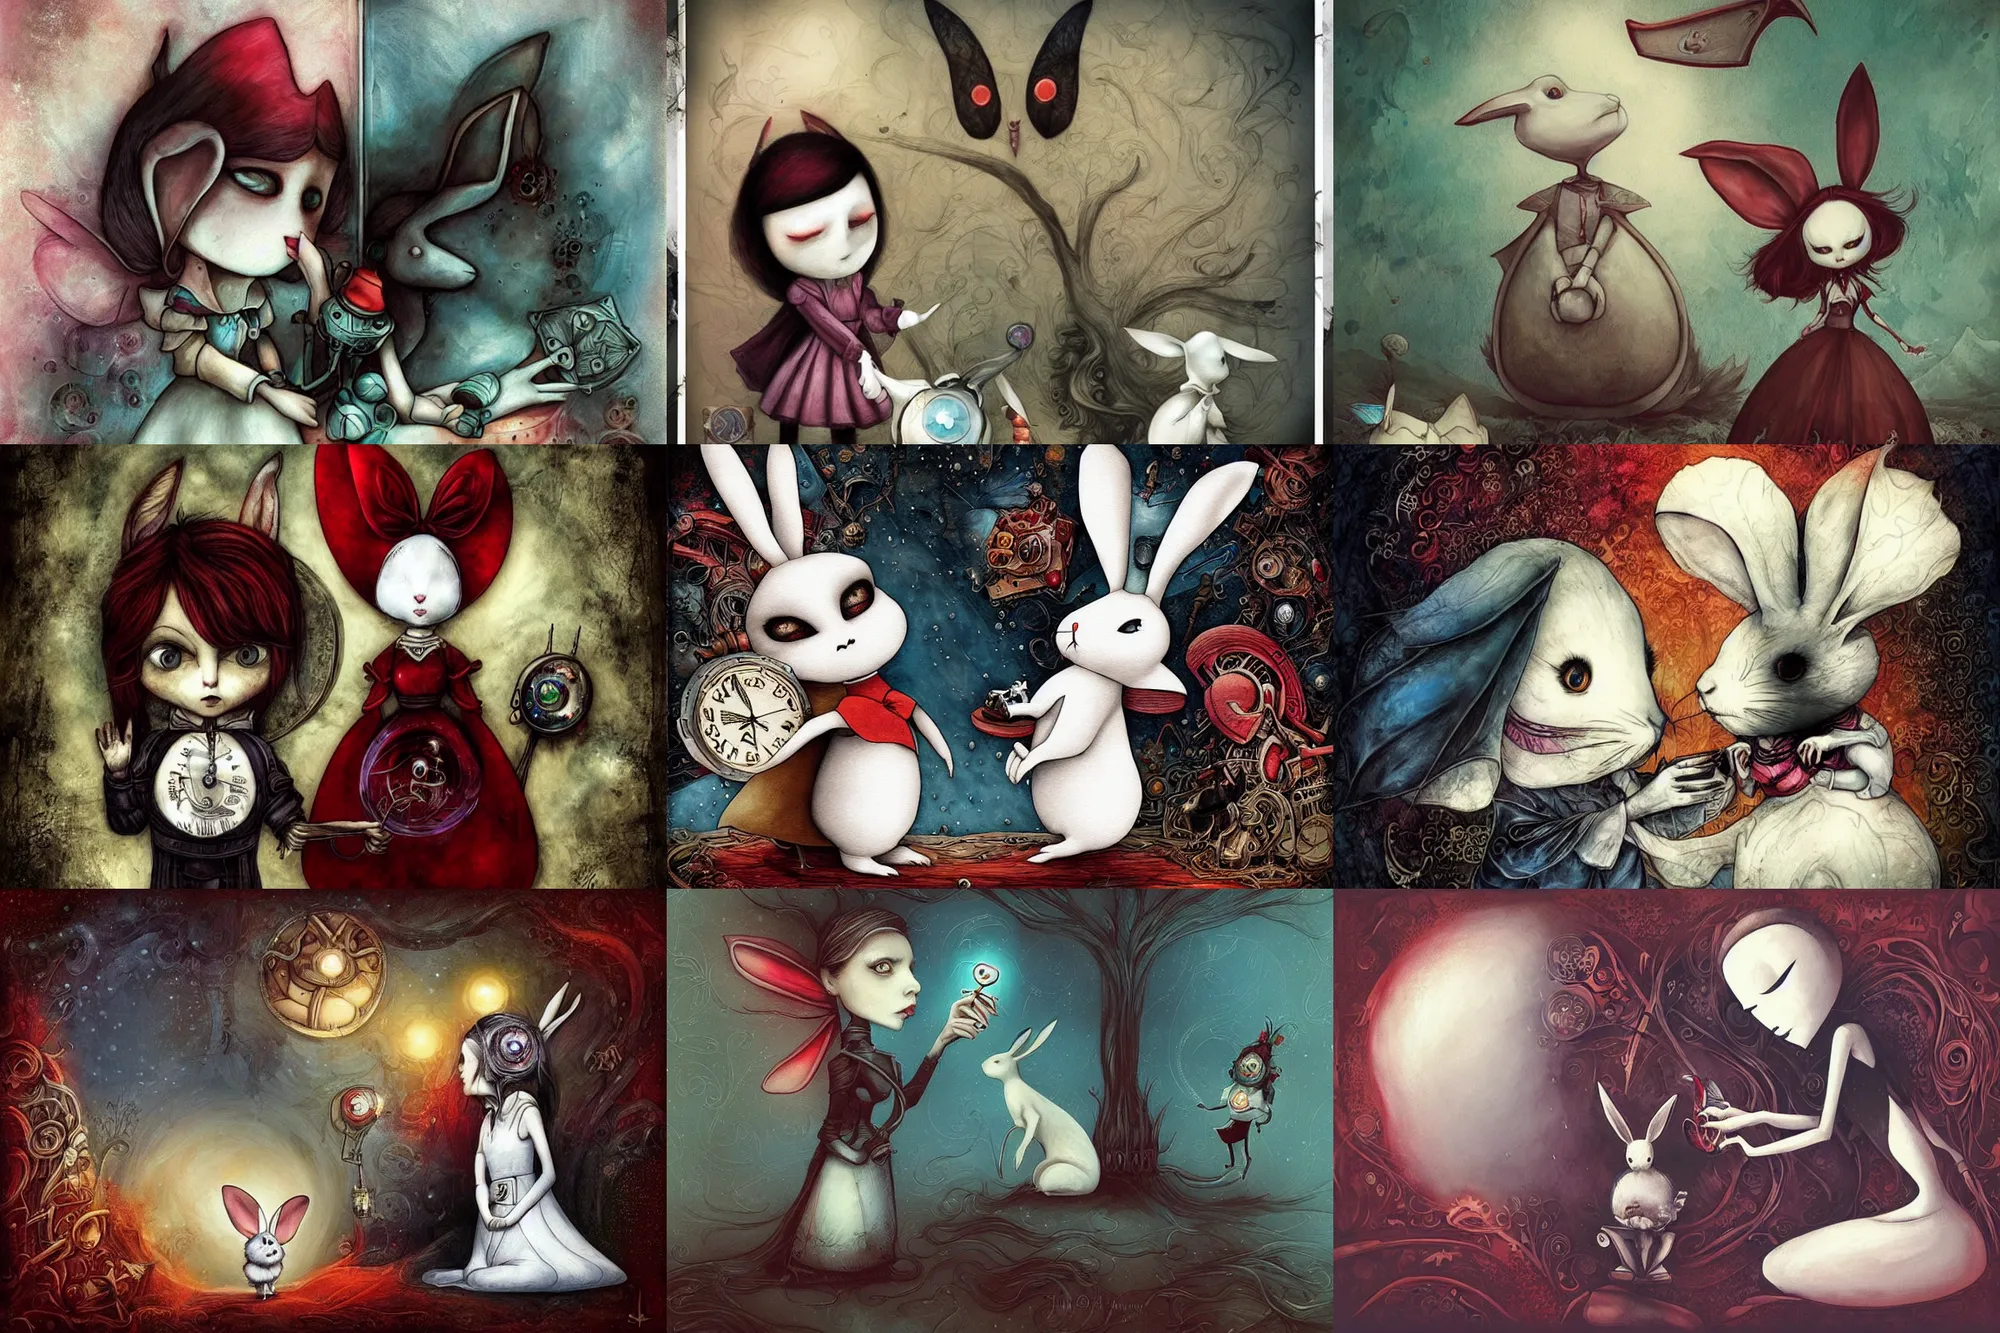 Prompt: Alice fans herself with the White Rabbit\'s fan and shrinks again, biomechanoid, sci-fi, dramatic, art style Megan Duncanson and Benjamin Lacombe, super details, dark dull colors, ornate background, mysterious, eerie, sinister